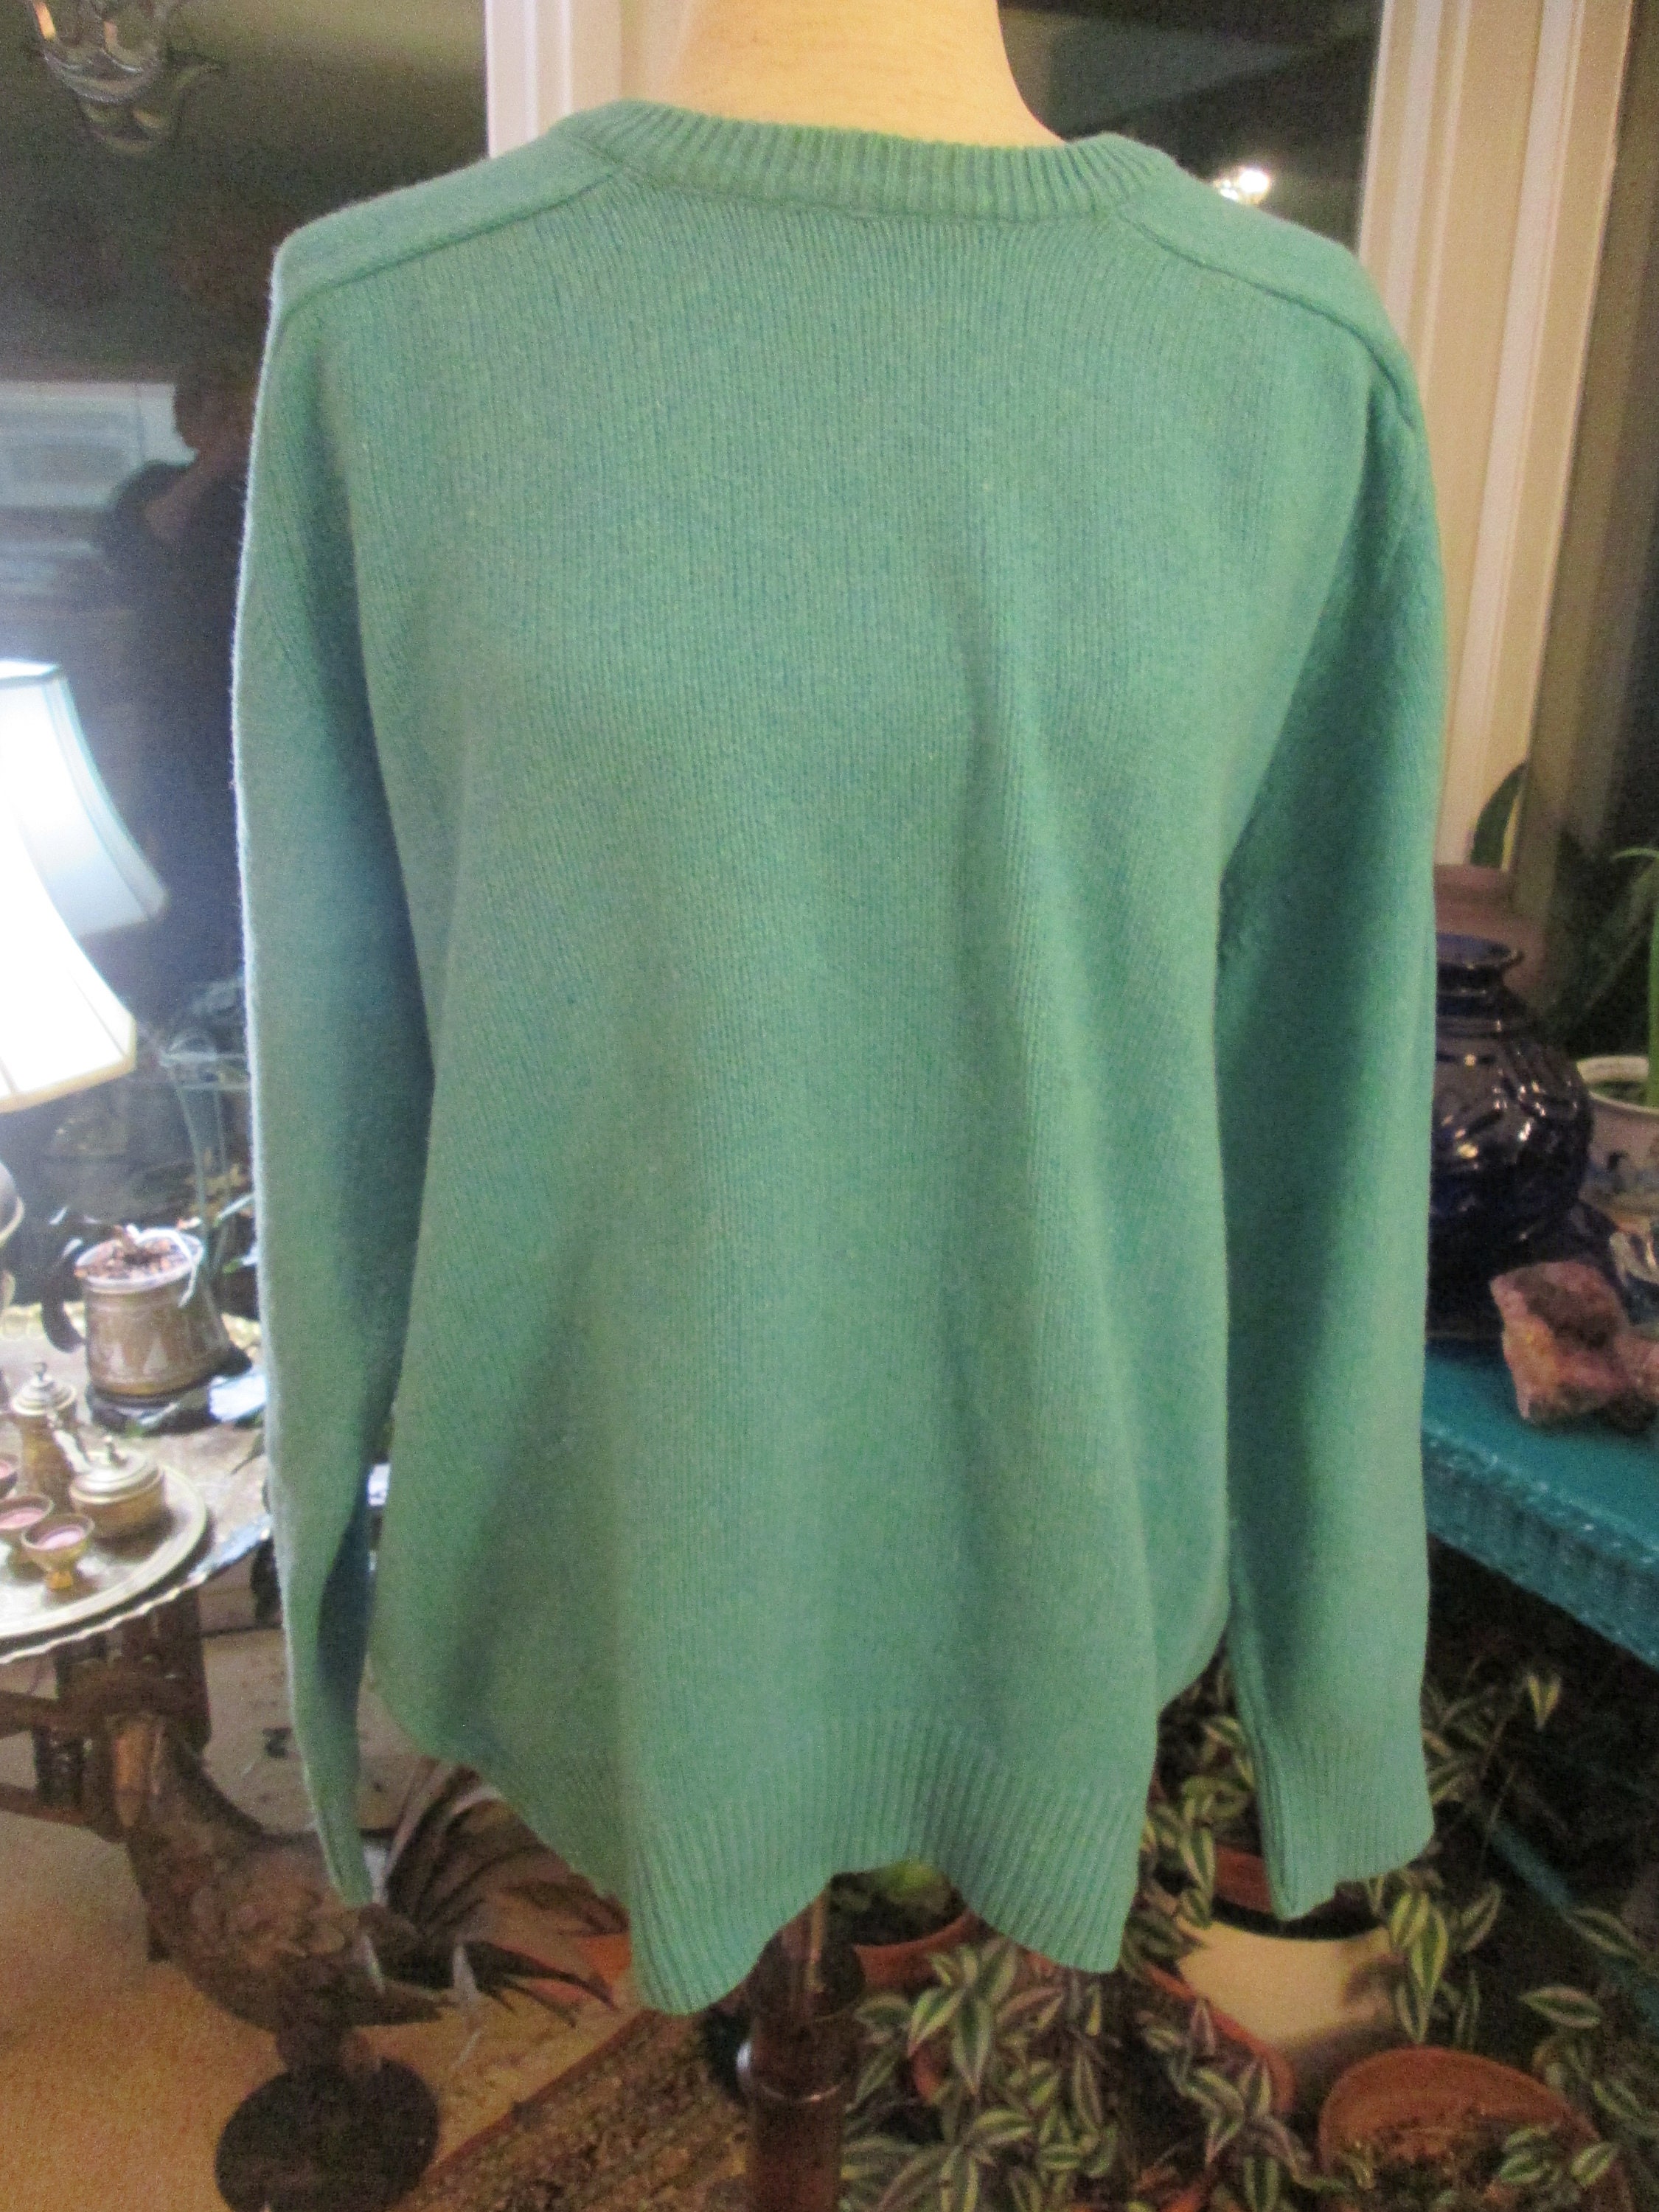 Vintage Wool Blend Crewneck Unisex Aqua Pullover Sweater Made in Italy Preppy Warm Weekend Sweater. 70 15 Nylon Acrylic Sz L